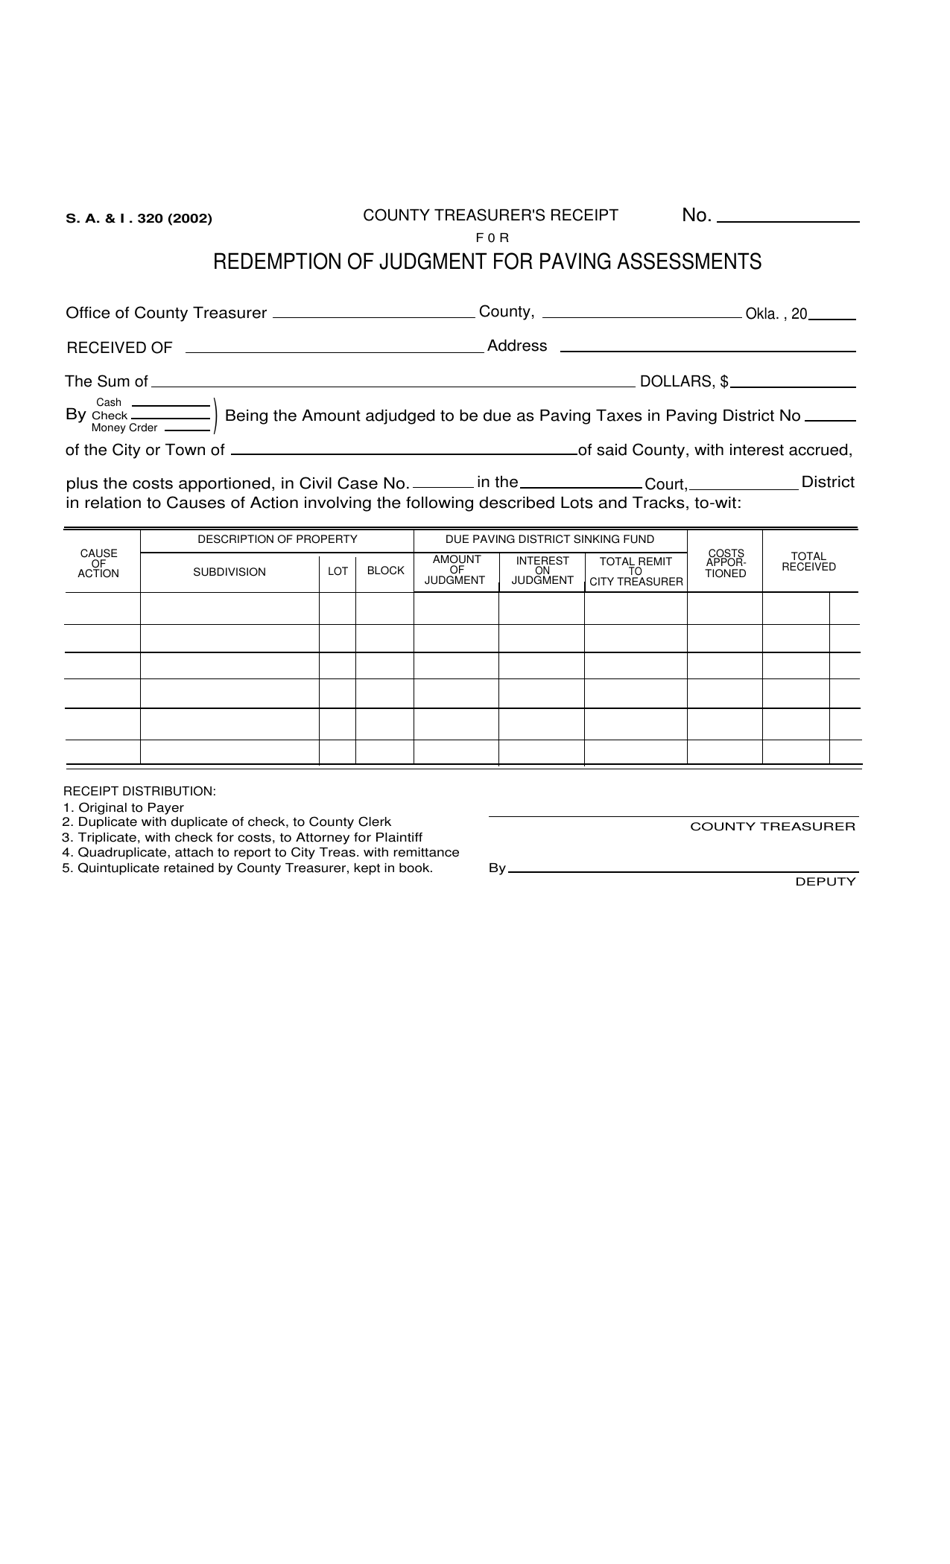 Form S.A. I.320 County Treasurers Receipt for Redemption of Judgment for Paving Assessments - Oklahoma, Page 1